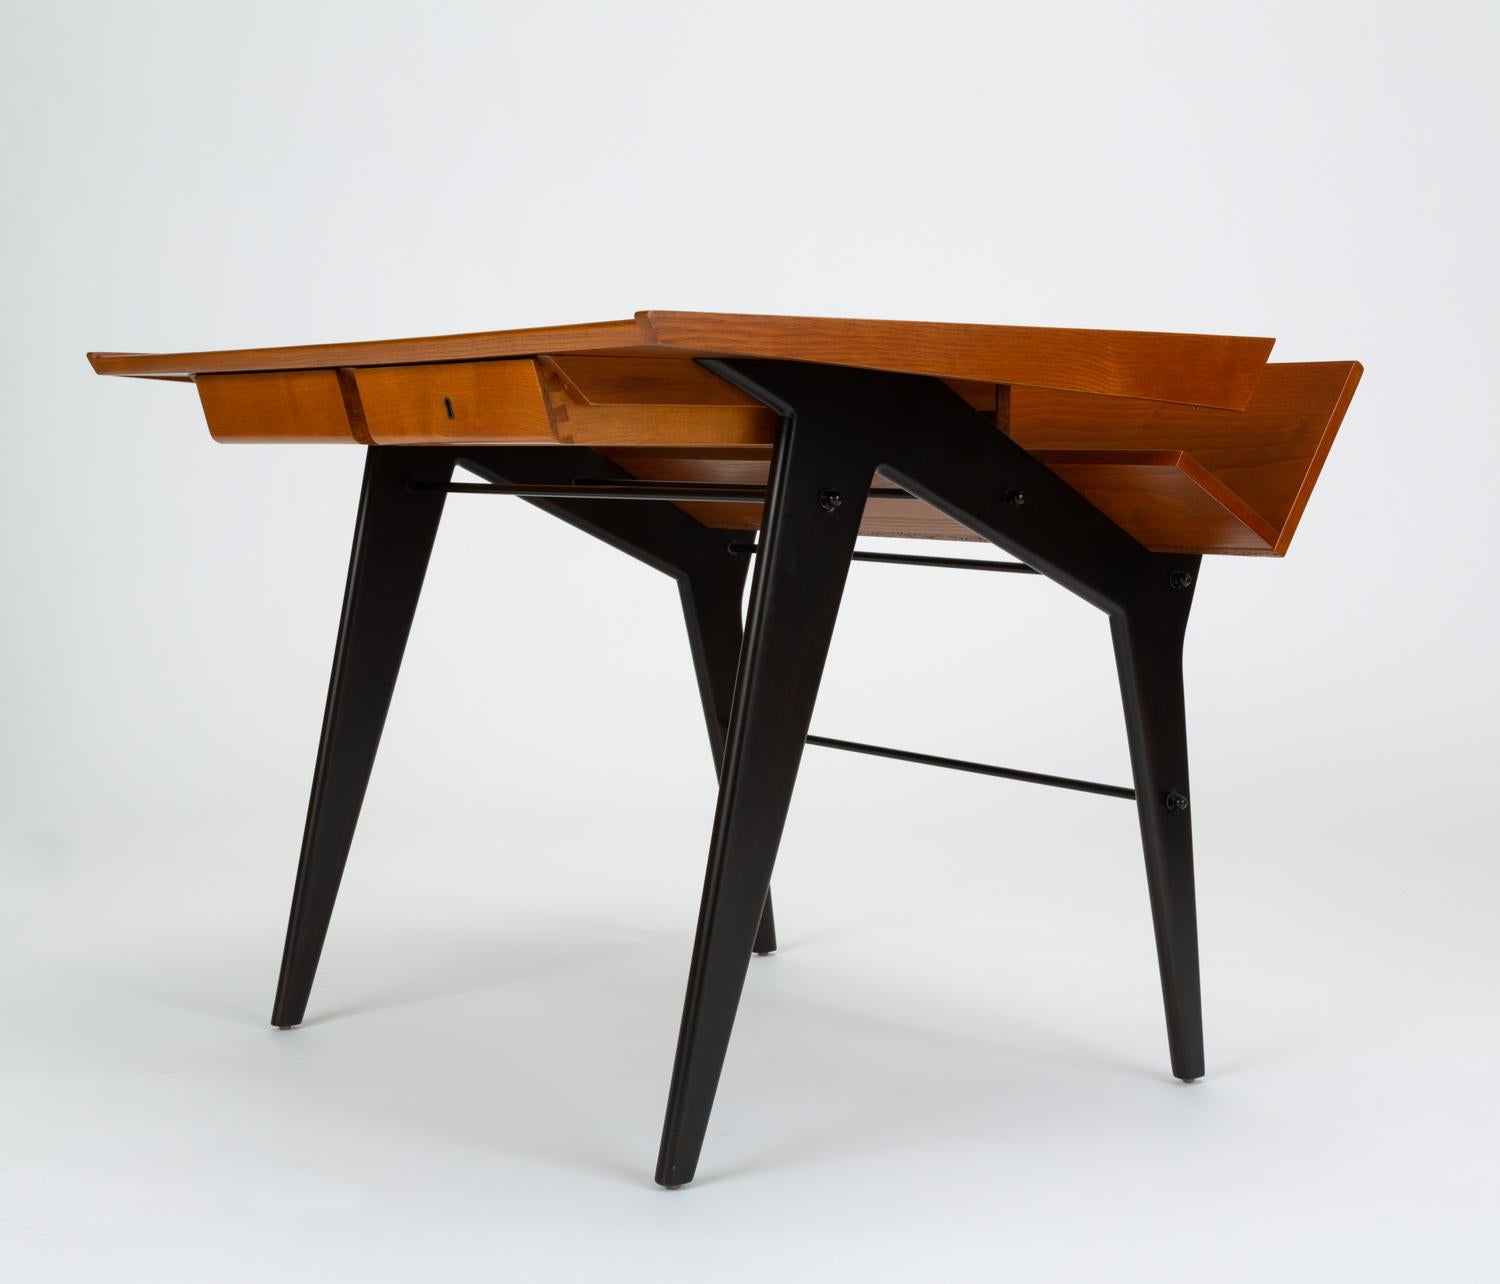 German modernist desk designed by Hartmut Lohmeyer in the 1960s and produced by Wilkhahn. This two-tone example is made of red oak, with ebonized legs. An ideal student desk or home office piece, the unique design features and angled shelf at the